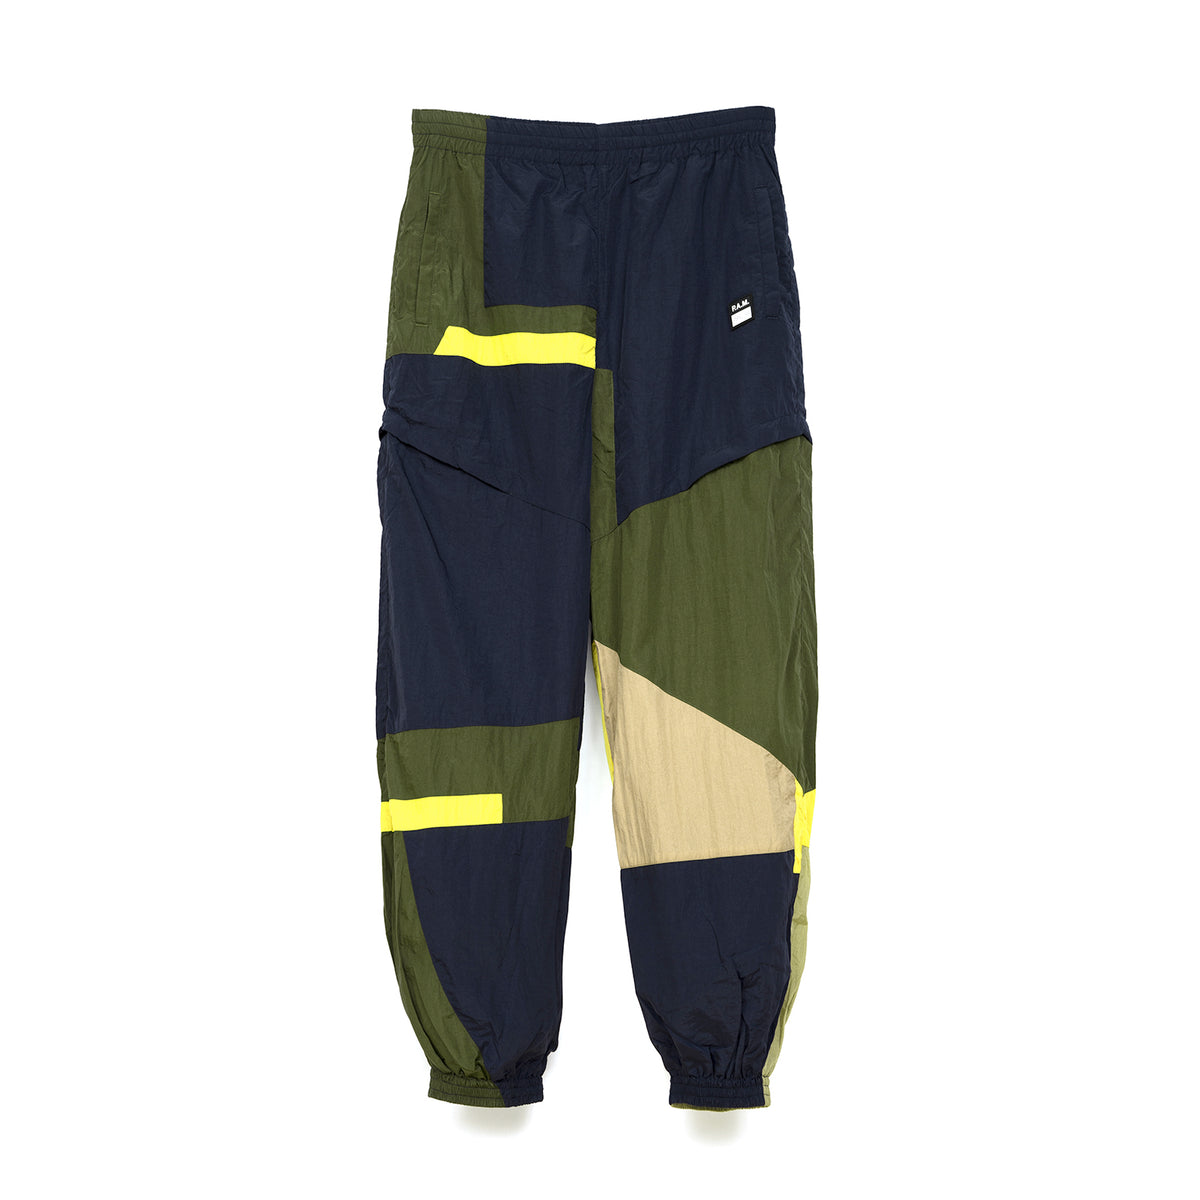 Perks and Mini (P.A.M.) | Over It's Shadow Sooth Track Pants Navy/Multi - Concrete